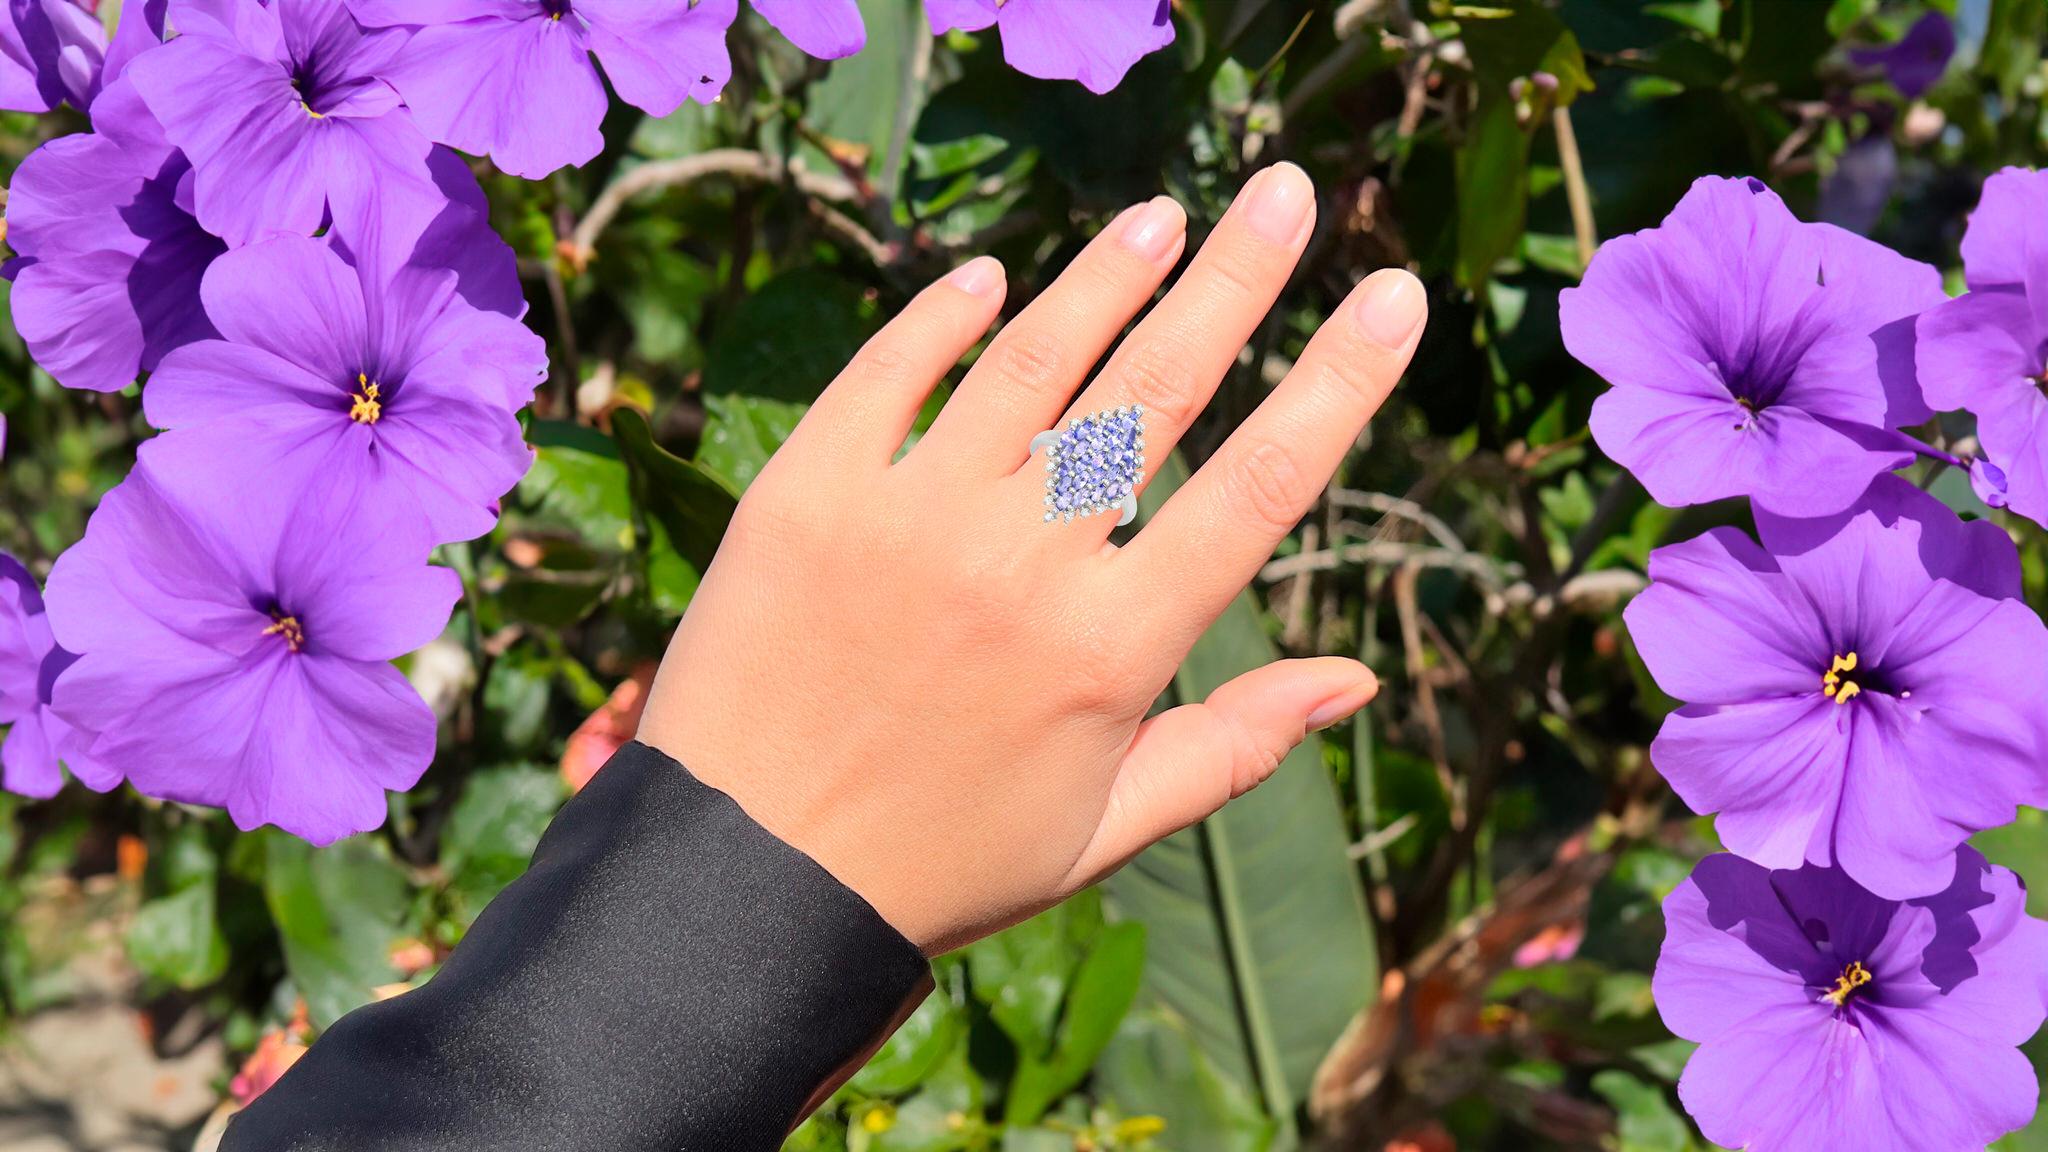 It comes with the Gemological Appraisal by GIA GG/AJP
All Gemstones are Natural
25 Tanzanites = 2.00 Carats
Cut: Marquise
18 White Topazes = 0.40 Carats
Cut: Round
Metal: Rhodium Plated Sterling Silver
Ring Size: 6* US
*It can be resized